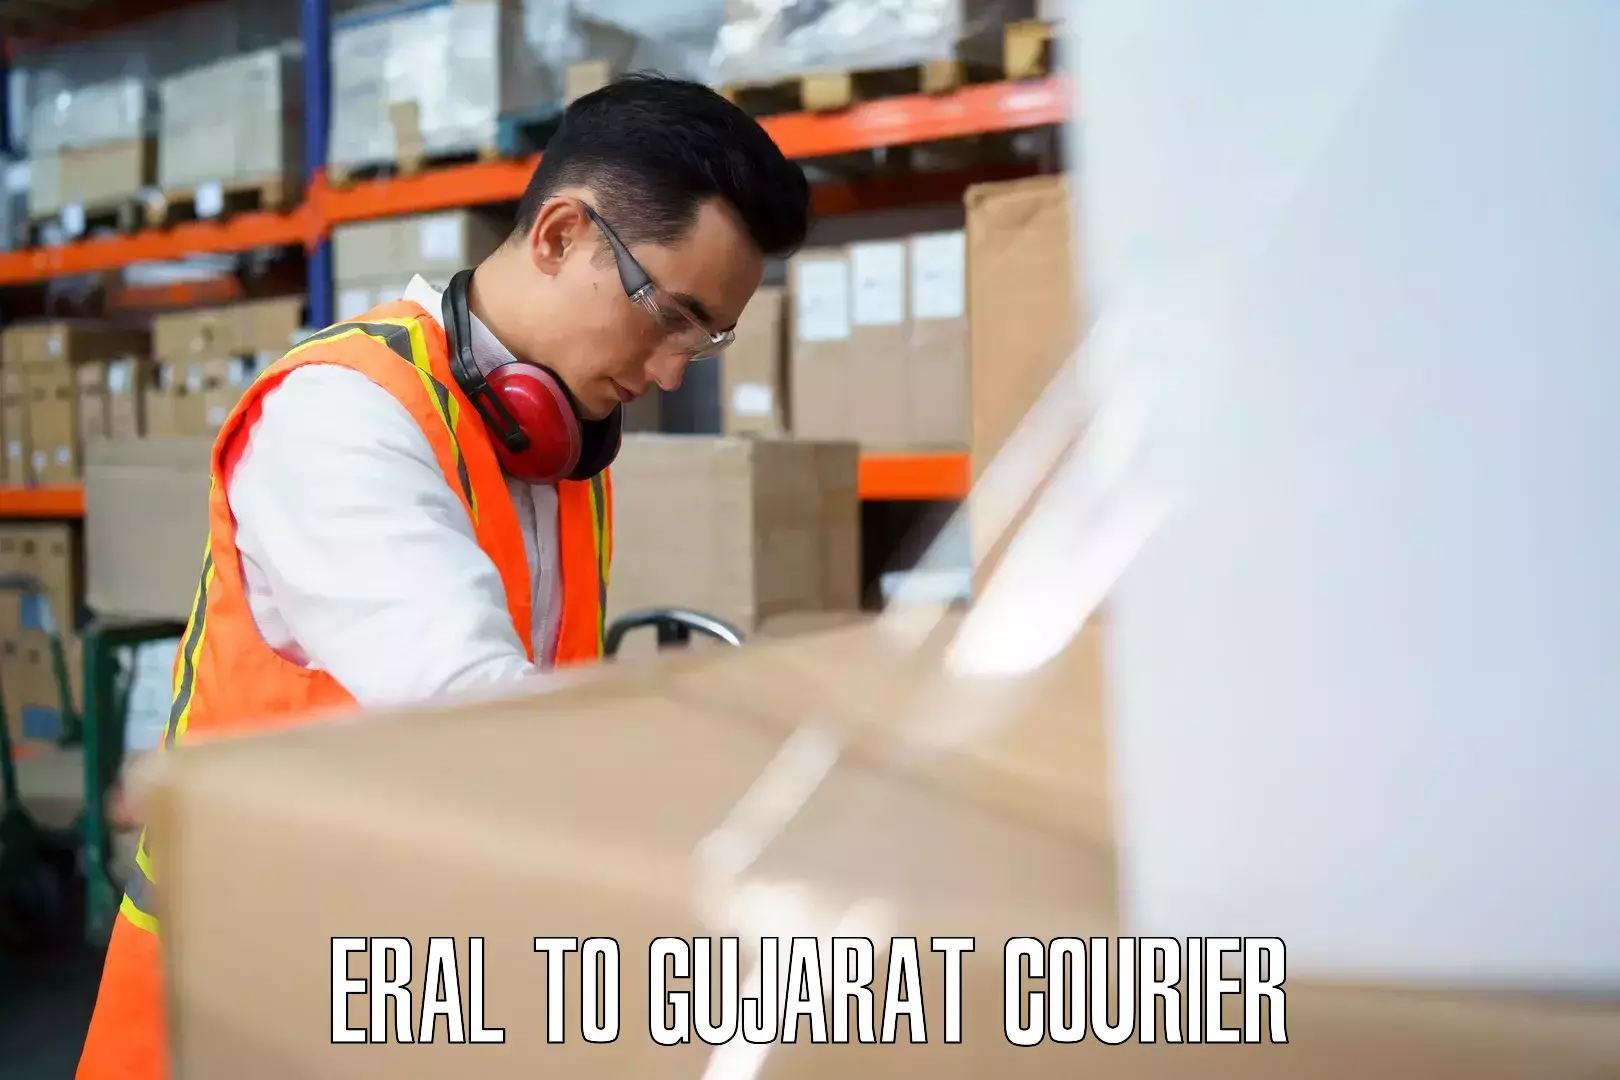 Luggage shipment specialists Eral to Surat